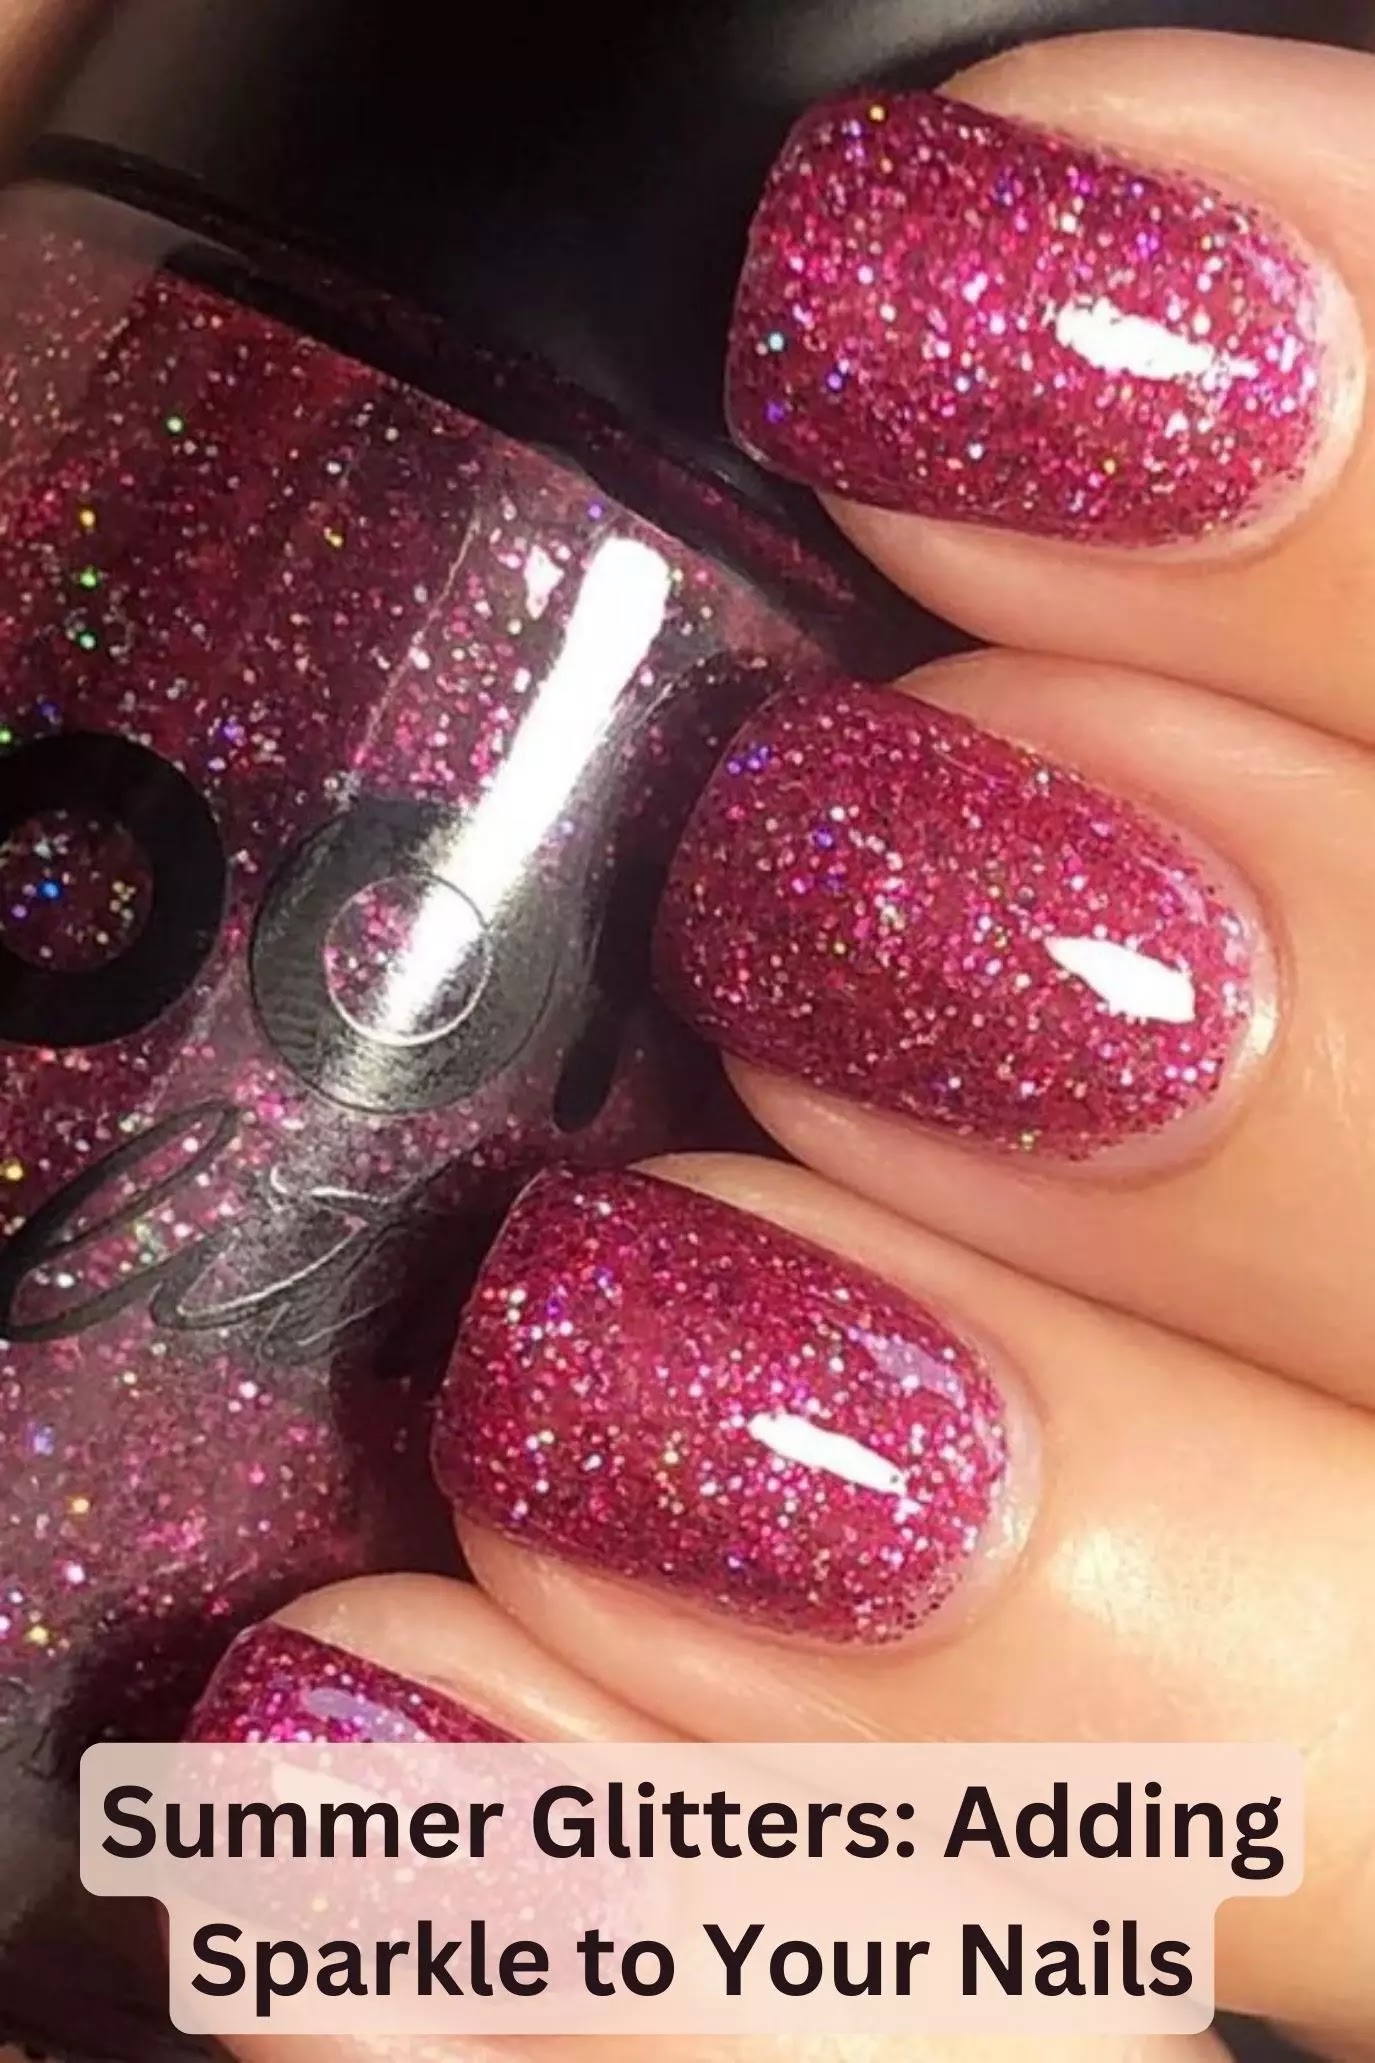 Summer Glitters: Adding Sparkle to Your Nails